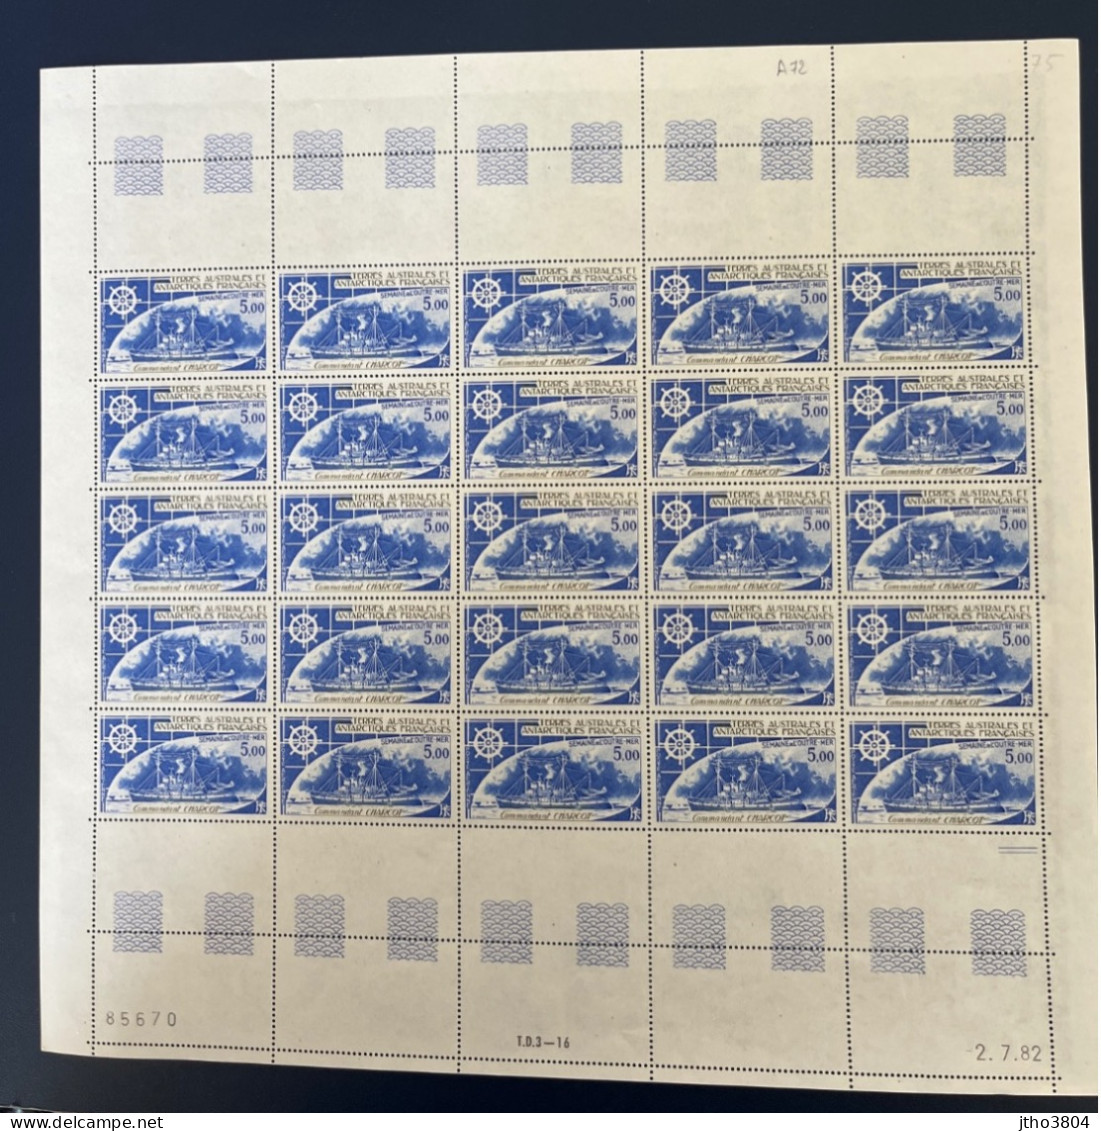 TAAF PLANCHE 25 TIMBRES POSTE AERIENNE PA 72 COTE 58 FACIALE 19 - Airmail